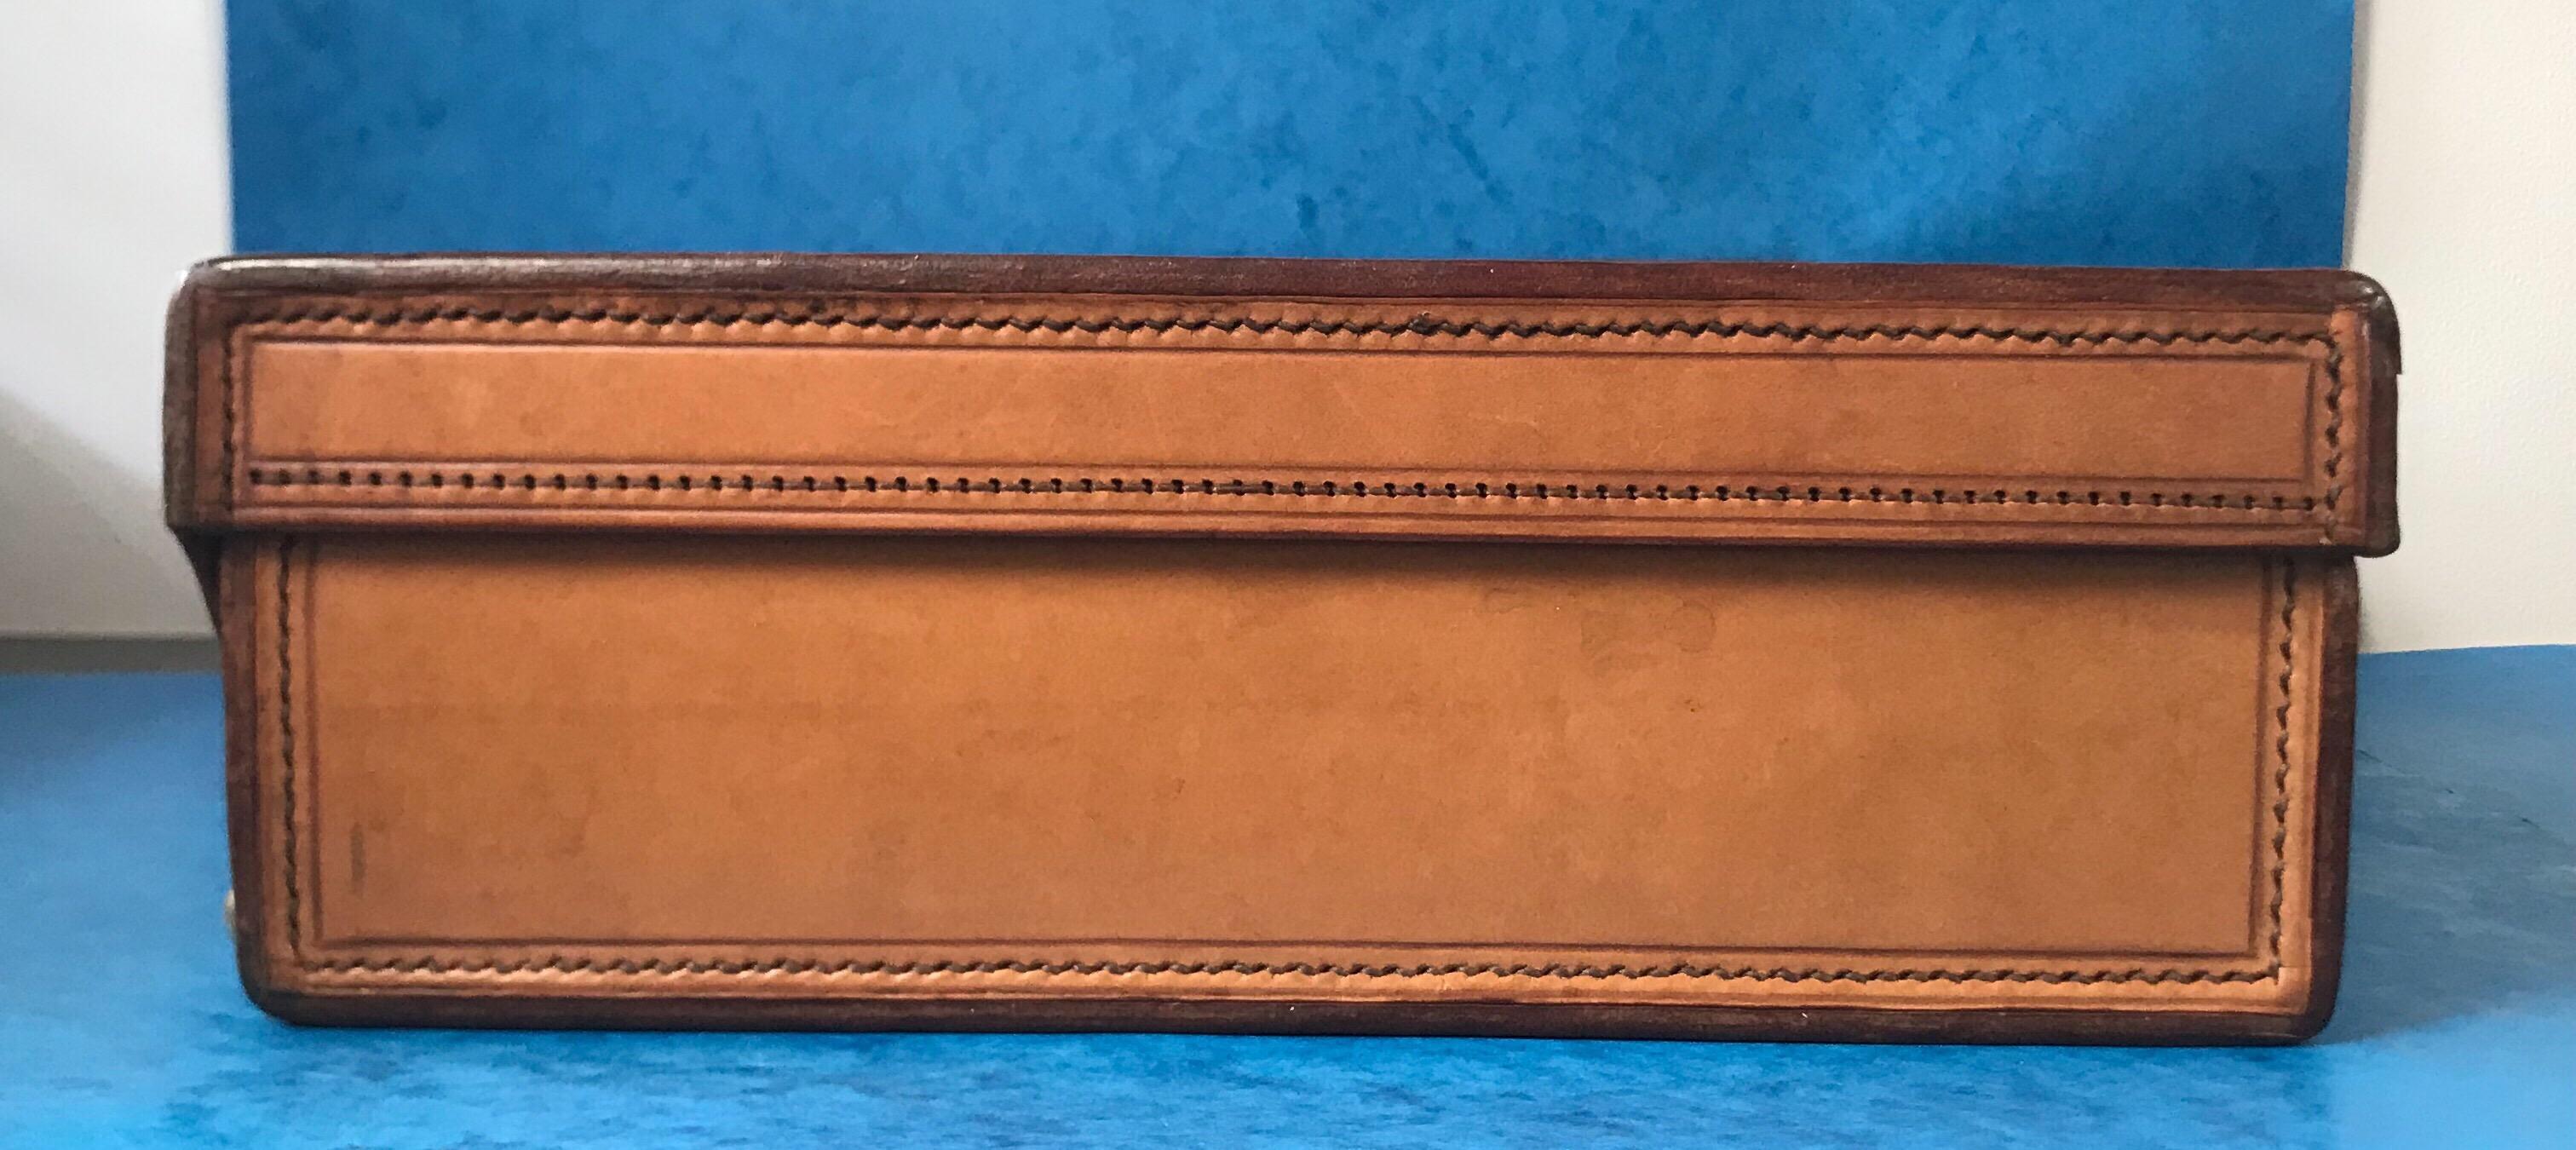 20th Century 1960-1970 Hide Leather Attaché Case by “W & H Gidden”